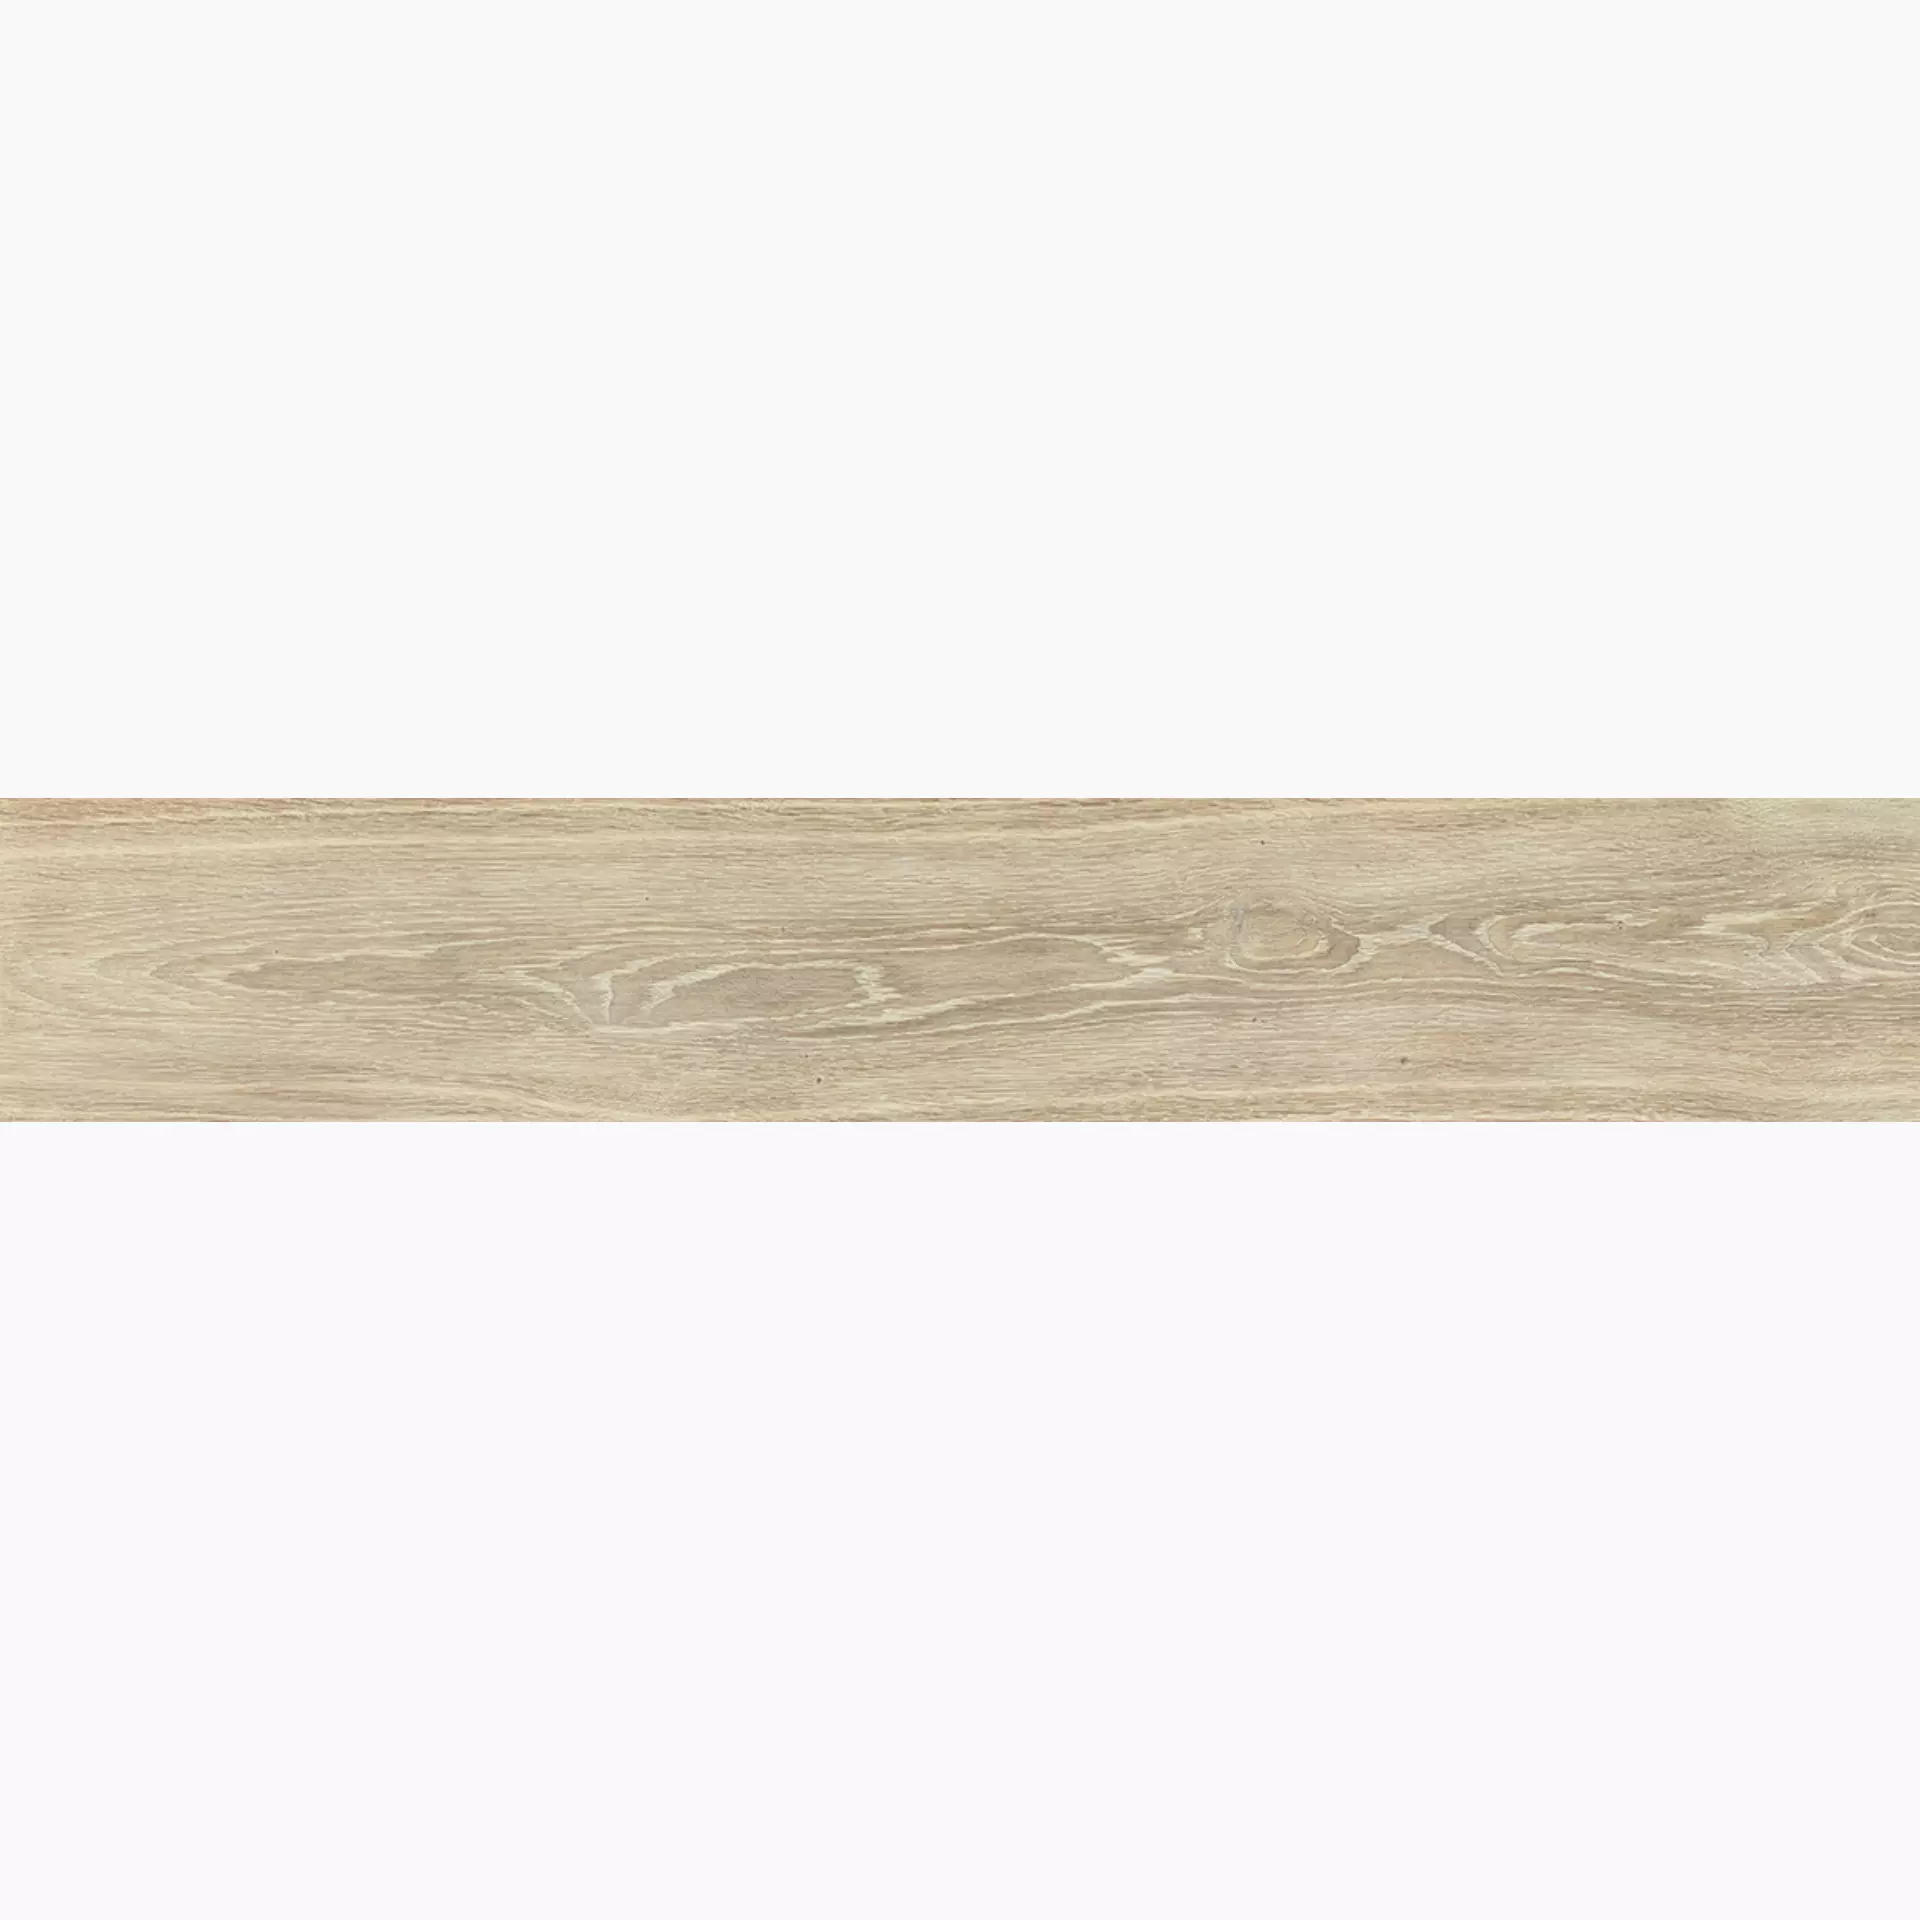 Ergon Woodtouch Miele Soft E0LP 20x120cm rectified 9,5mm